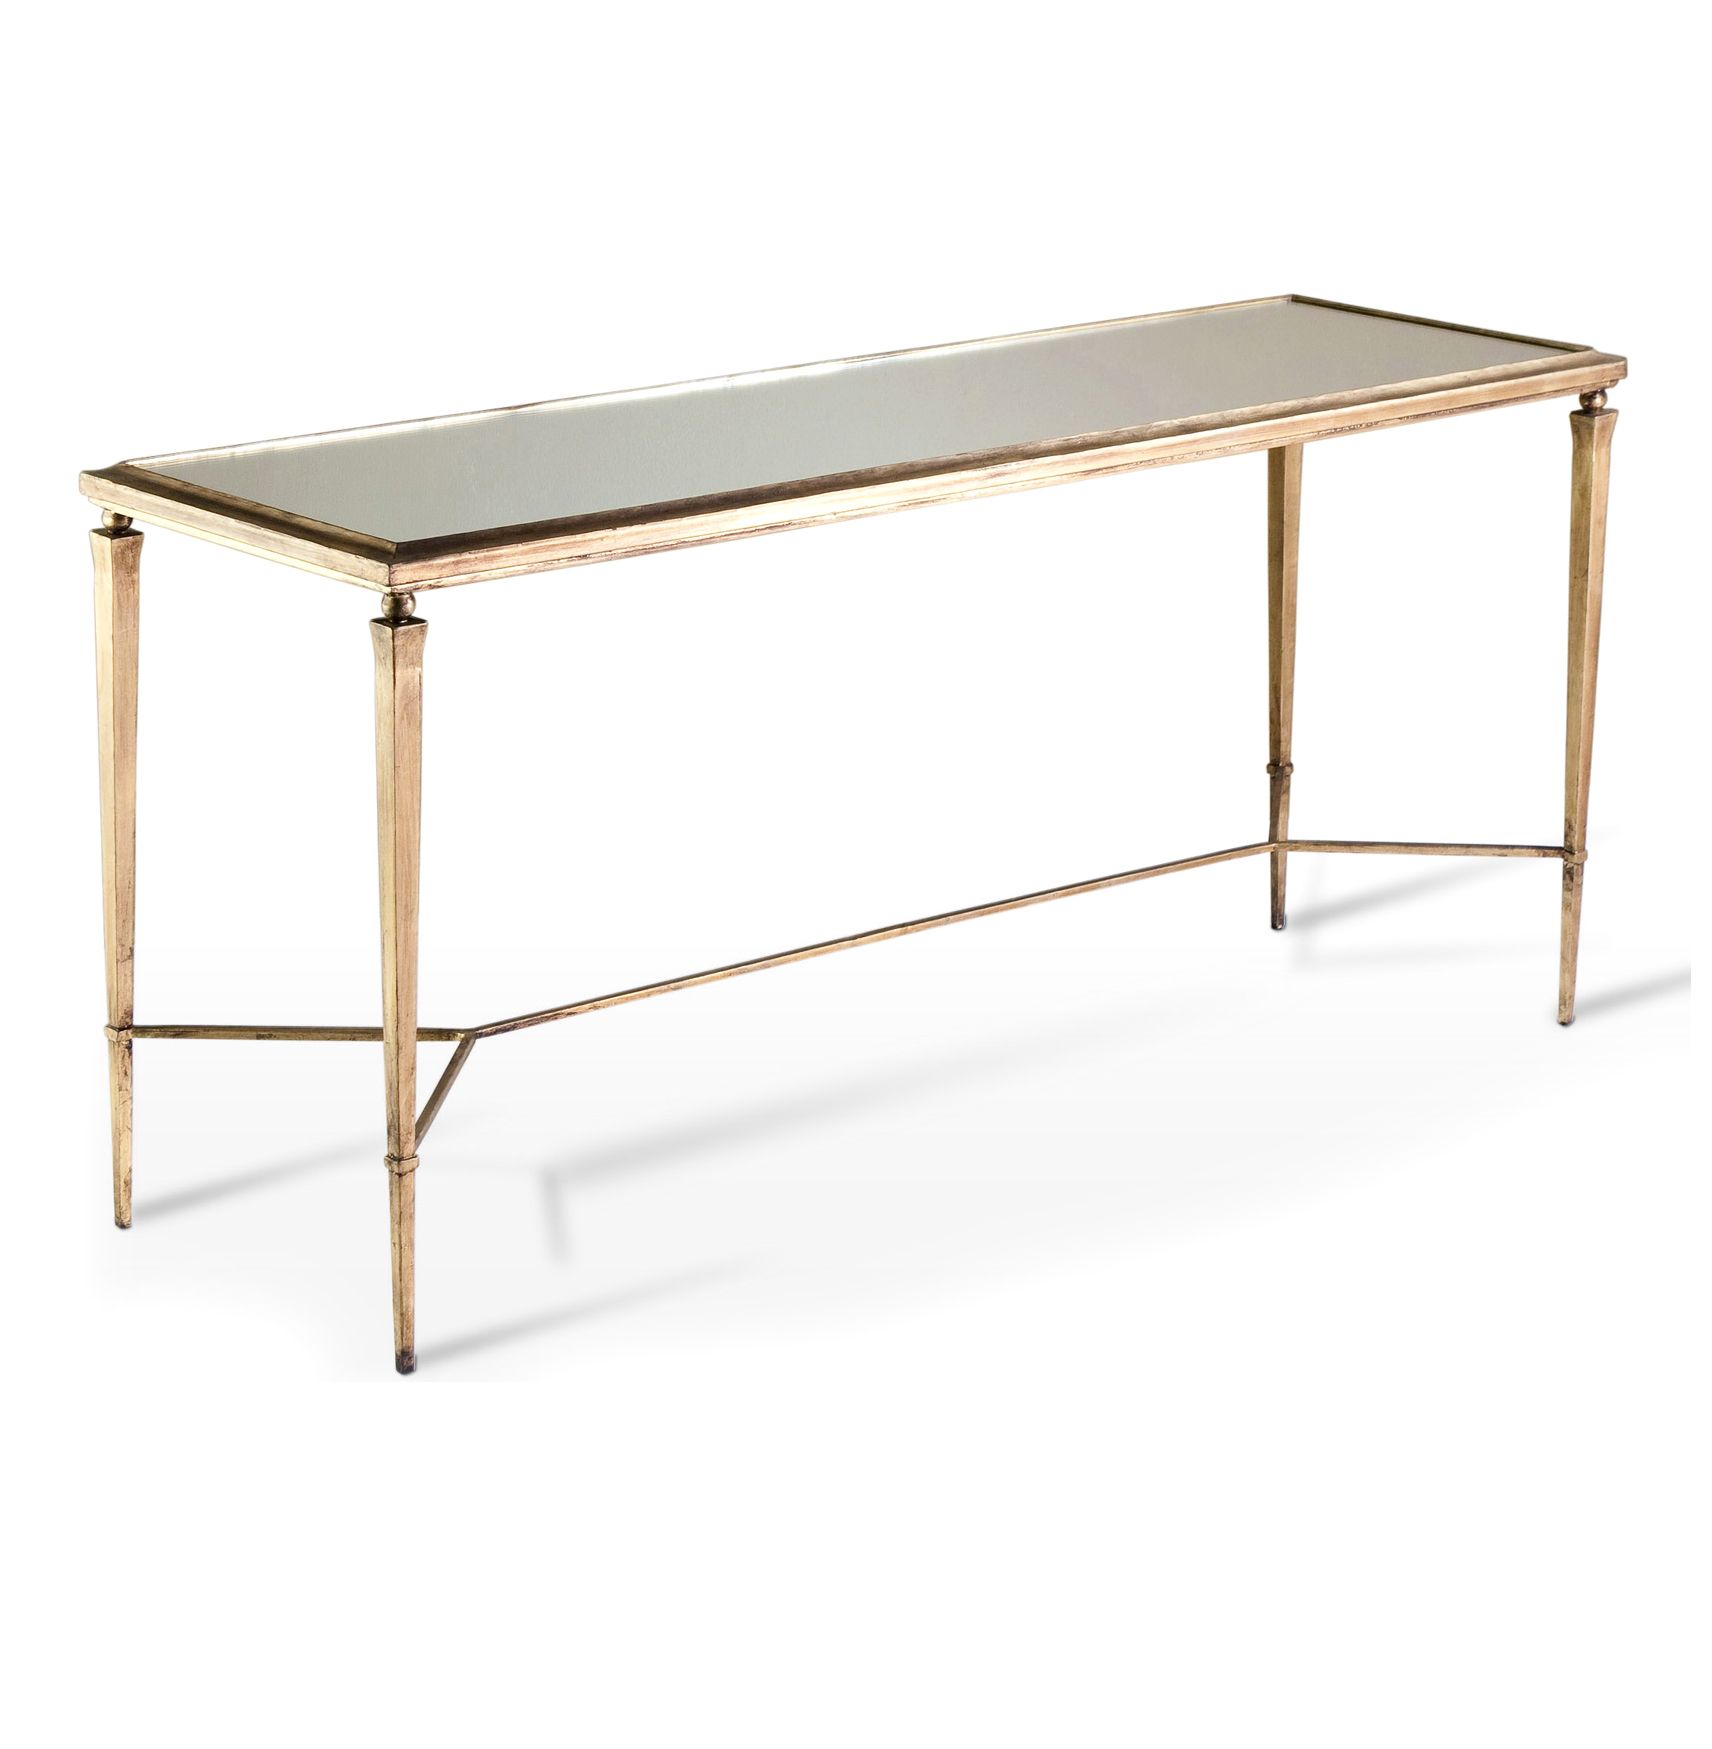 Console Tables Are Perfect For Placing In Any Room photo - 9